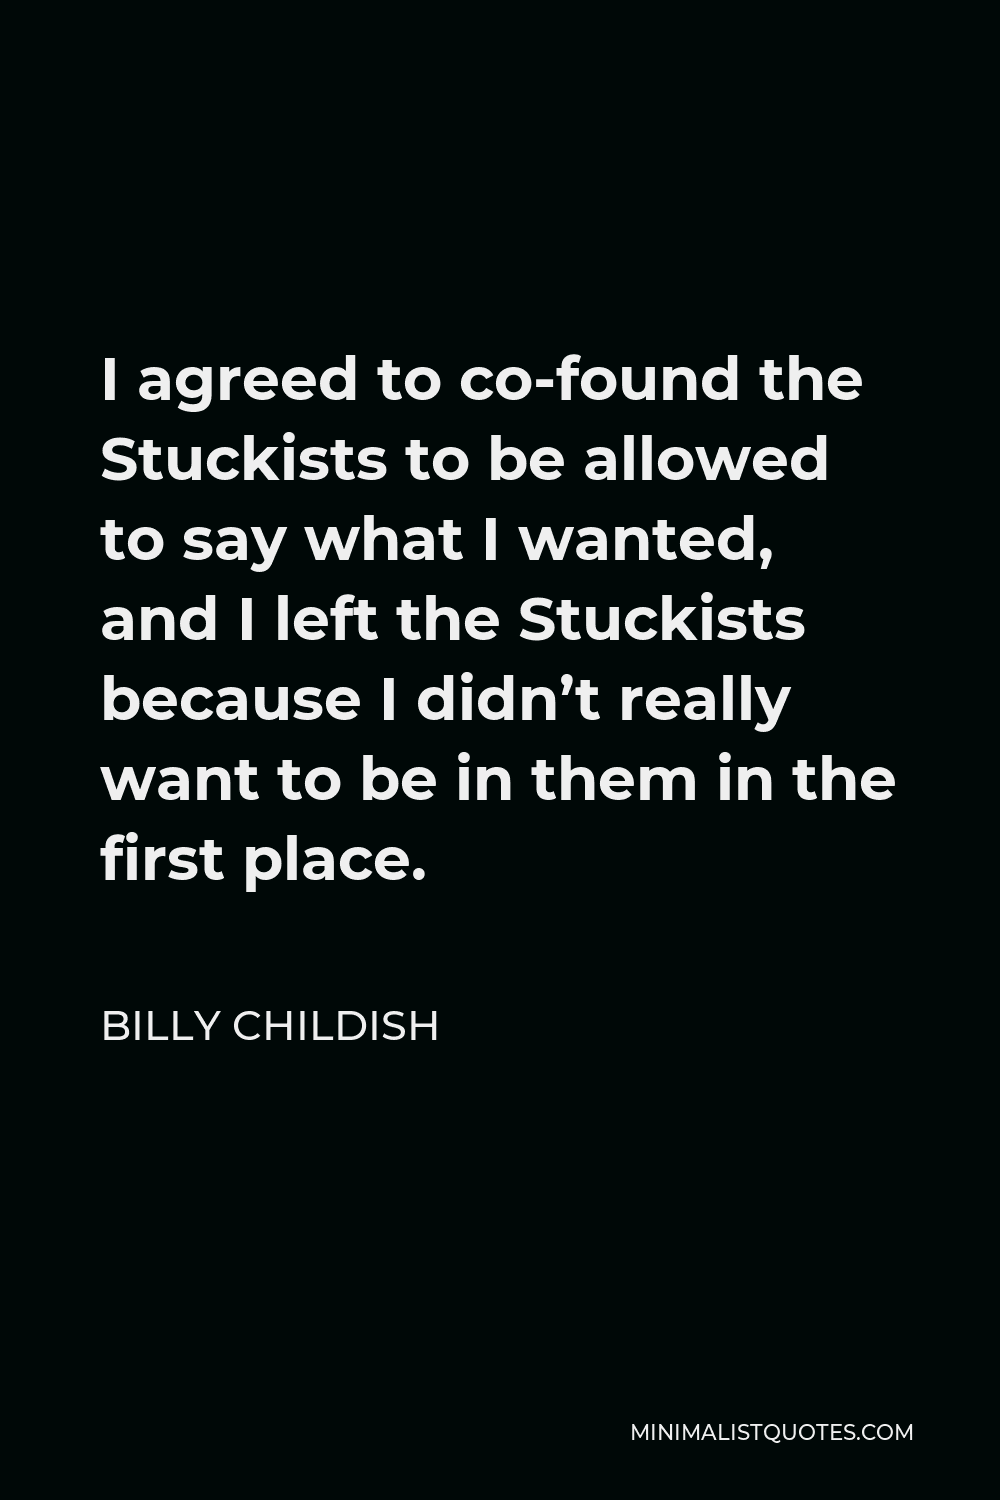 Billy Childish Quote - I agreed to co-found the Stuckists to be allowed to say what I wanted, and I left the Stuckists because I didn’t really want to be in them in the first place.